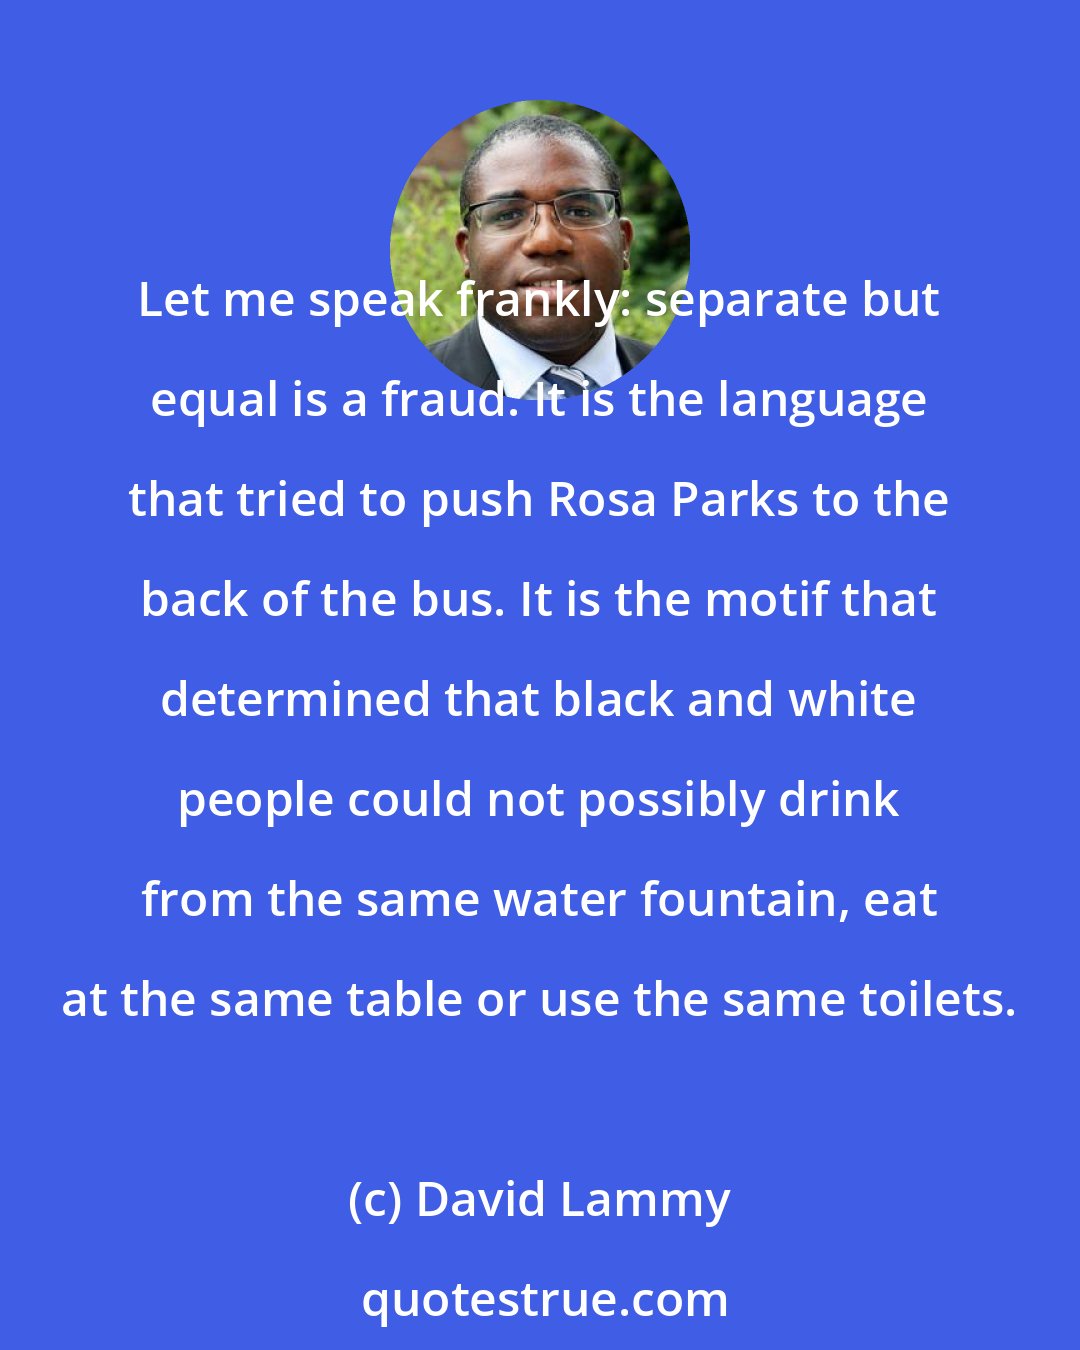 David Lammy: Let me speak frankly: separate but equal is a fraud. It is the language that tried to push Rosa Parks to the back of the bus. It is the motif that determined that black and white people could not possibly drink from the same water fountain, eat at the same table or use the same toilets.